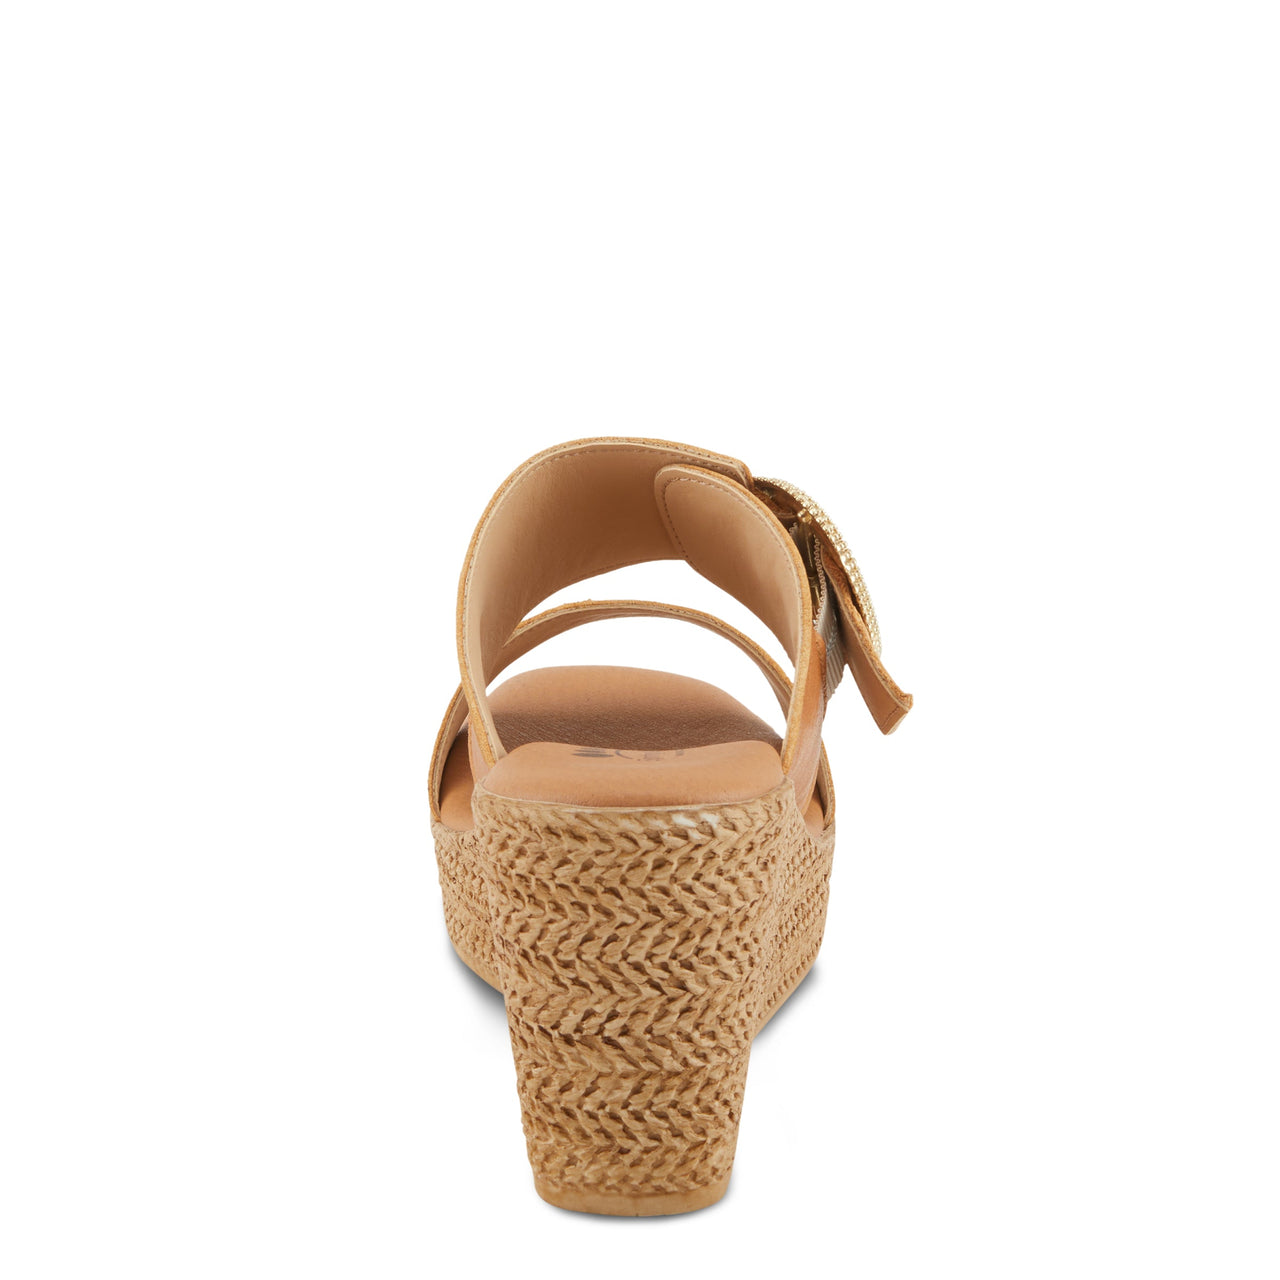  Spring Step Mares Sandals in pink with perforated design and floral print footbed